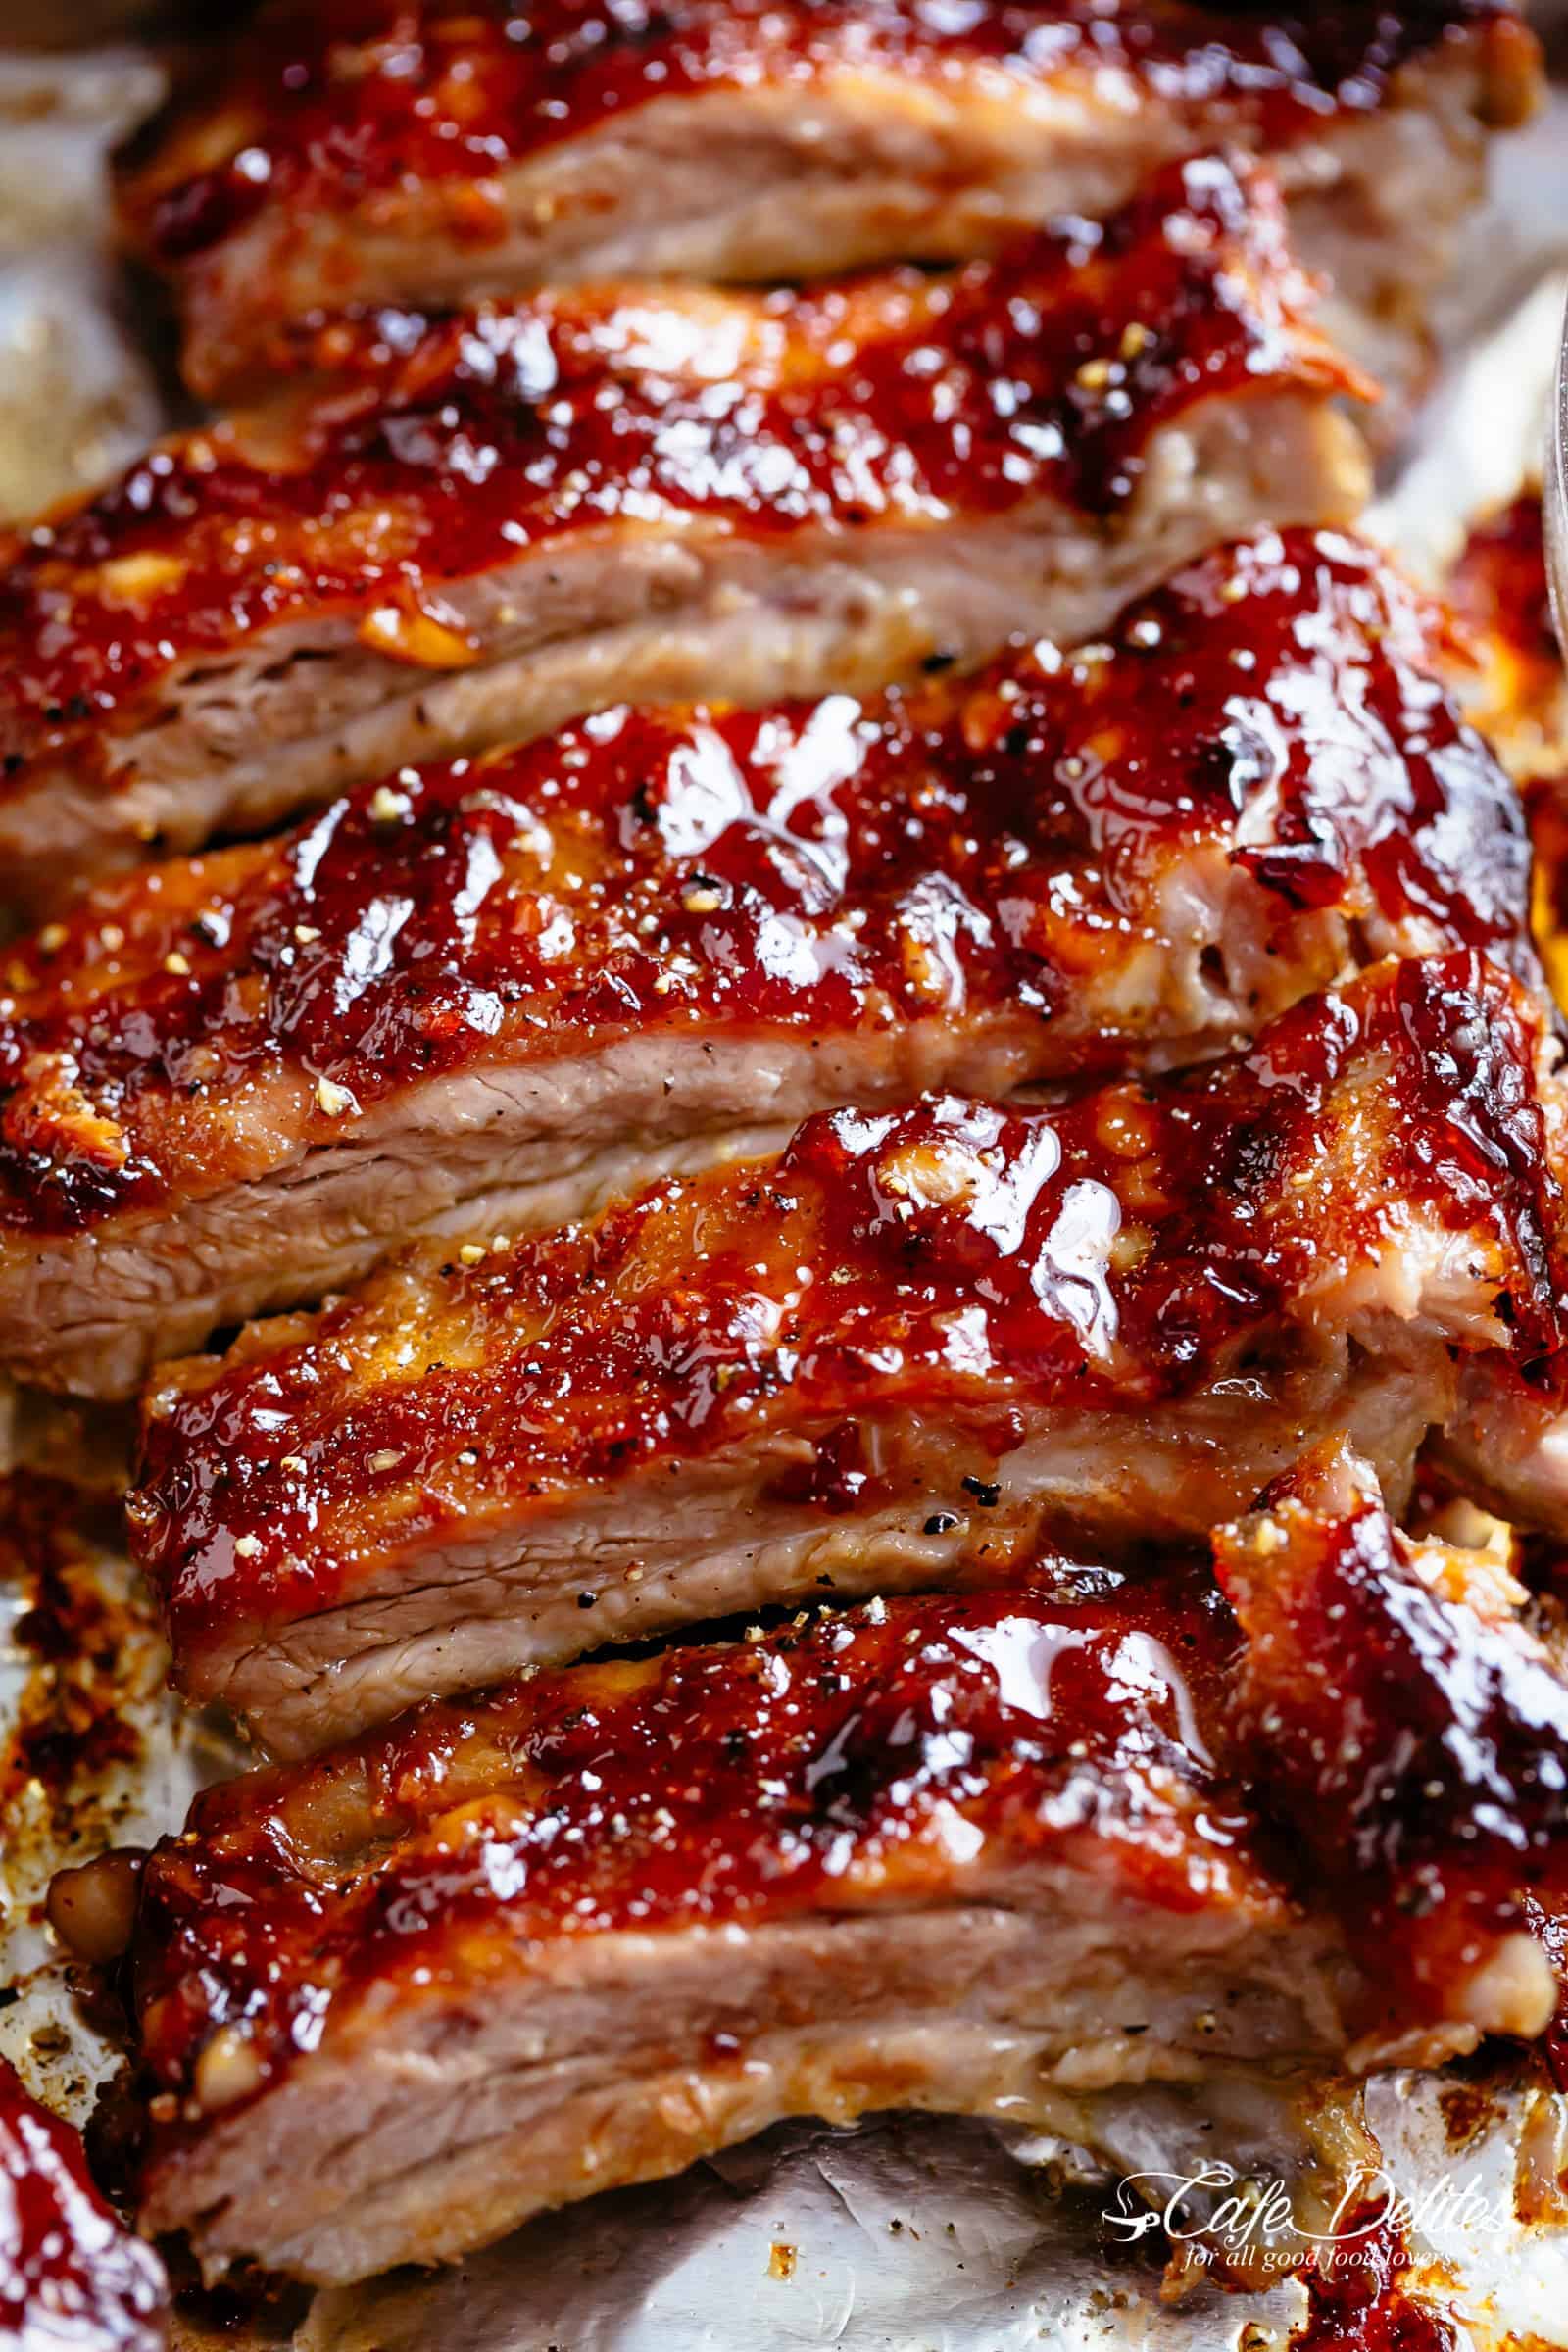 American Ribs Oven Baked and slathered in the most delicious barbecue sauce! | cafedelites.com